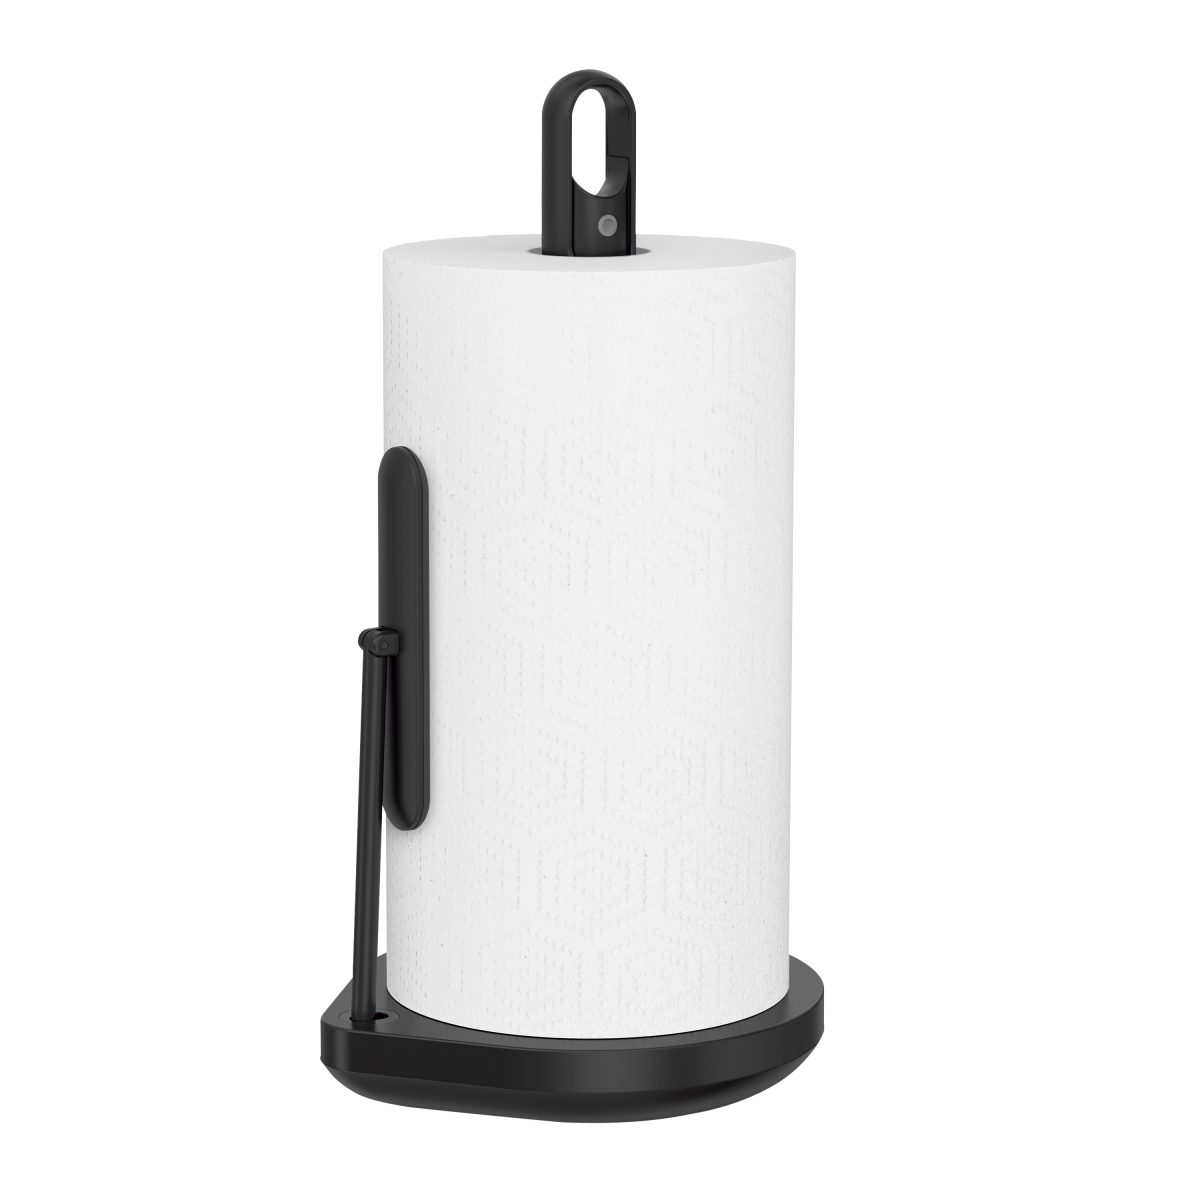 This very useful Tension Paper Towel Holder with Spray Bottle